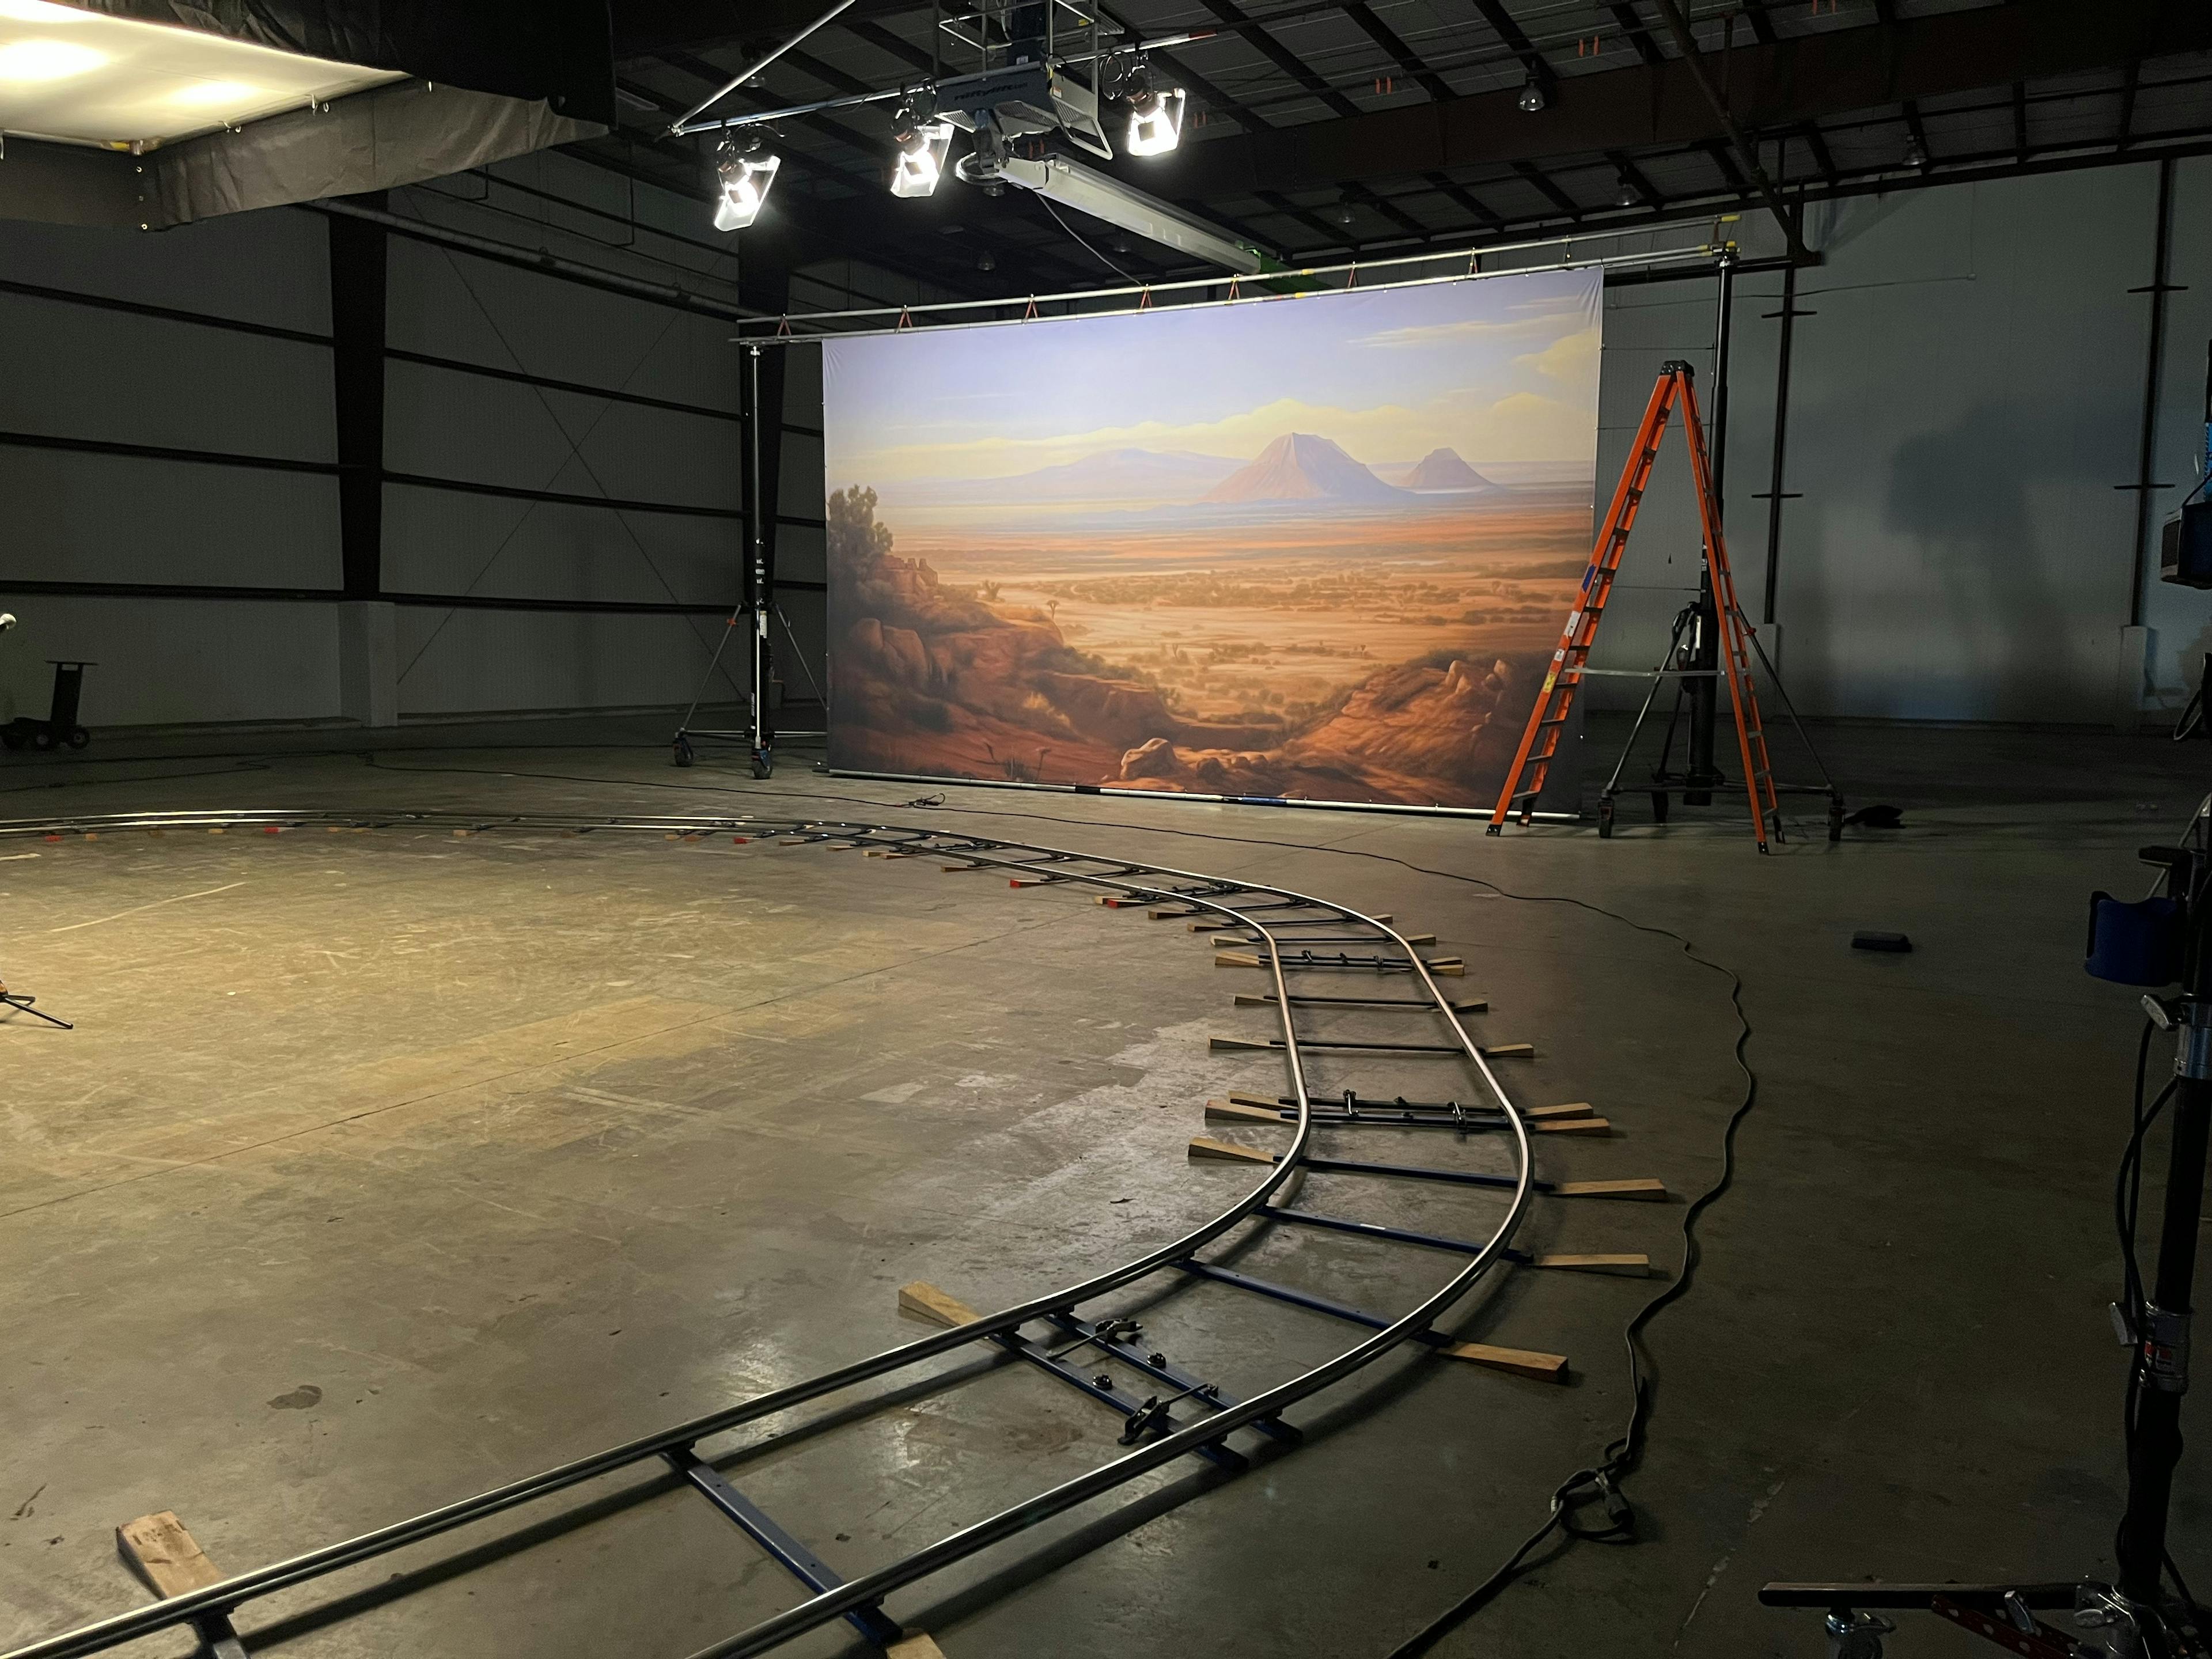 Small train tracks run through a studio with a backdrop of the desert